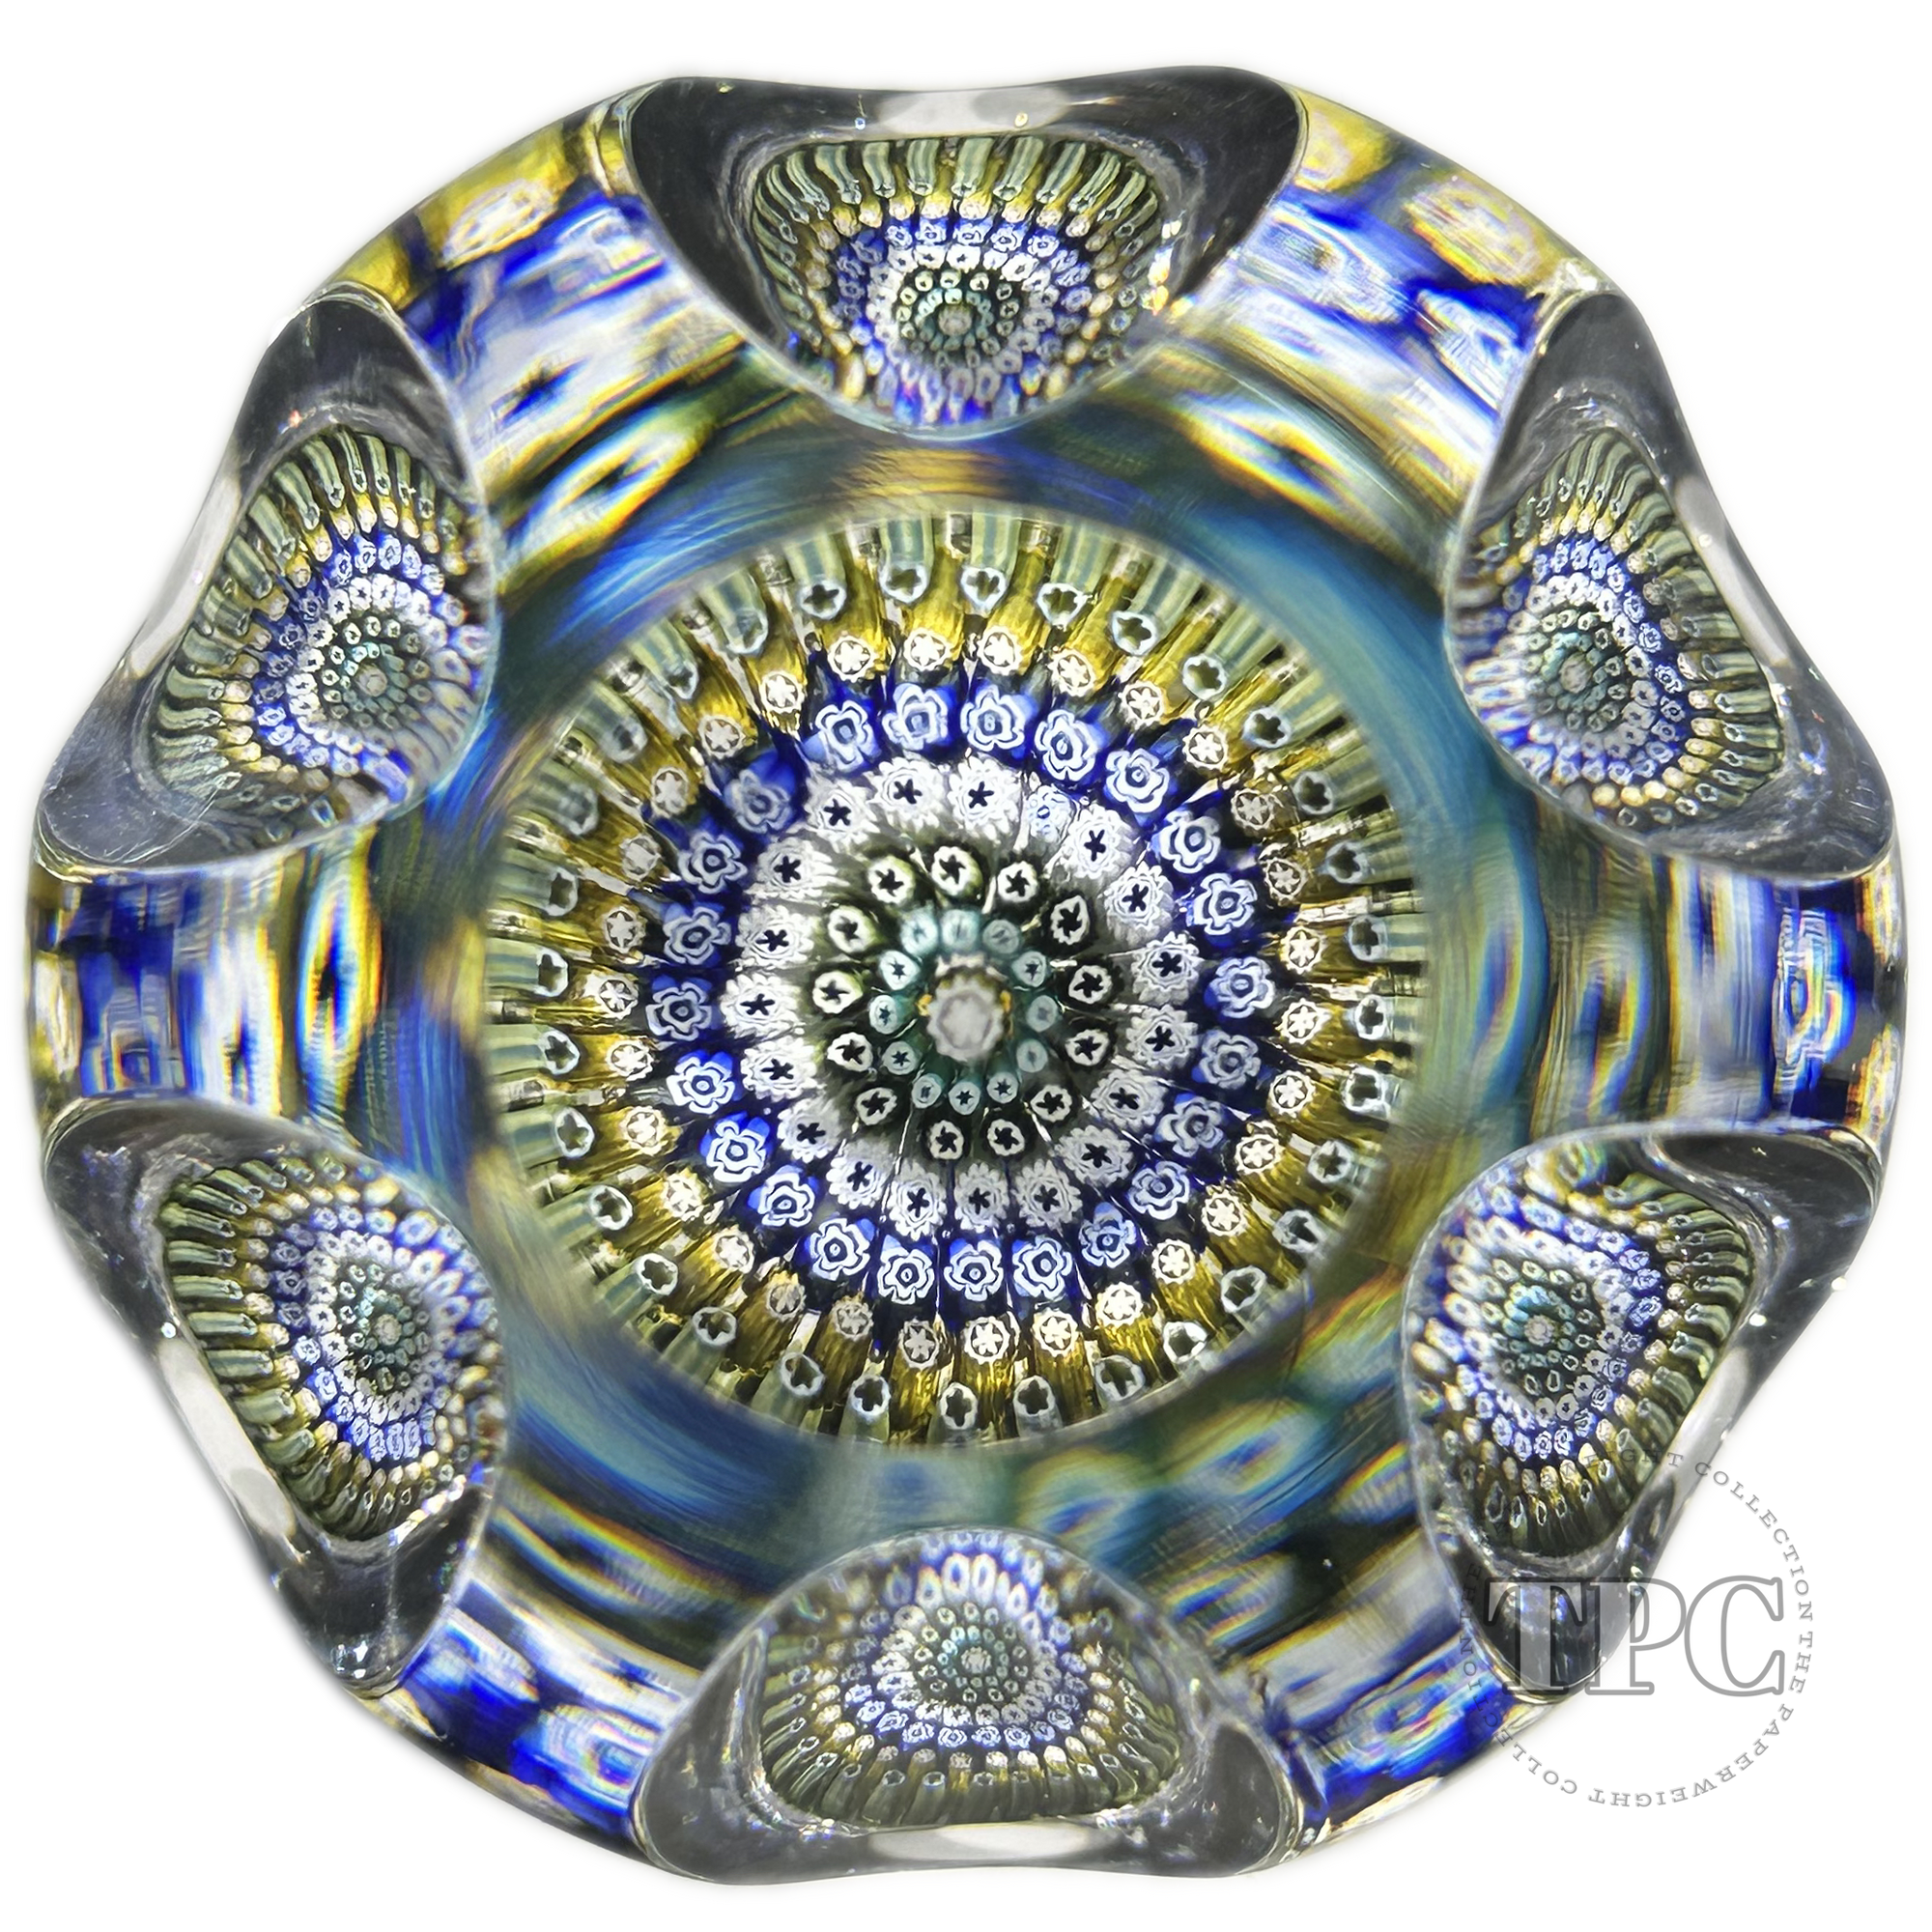 Whitefriars Faceted Glass Art Paperweight Colorful Concentric Millefiori